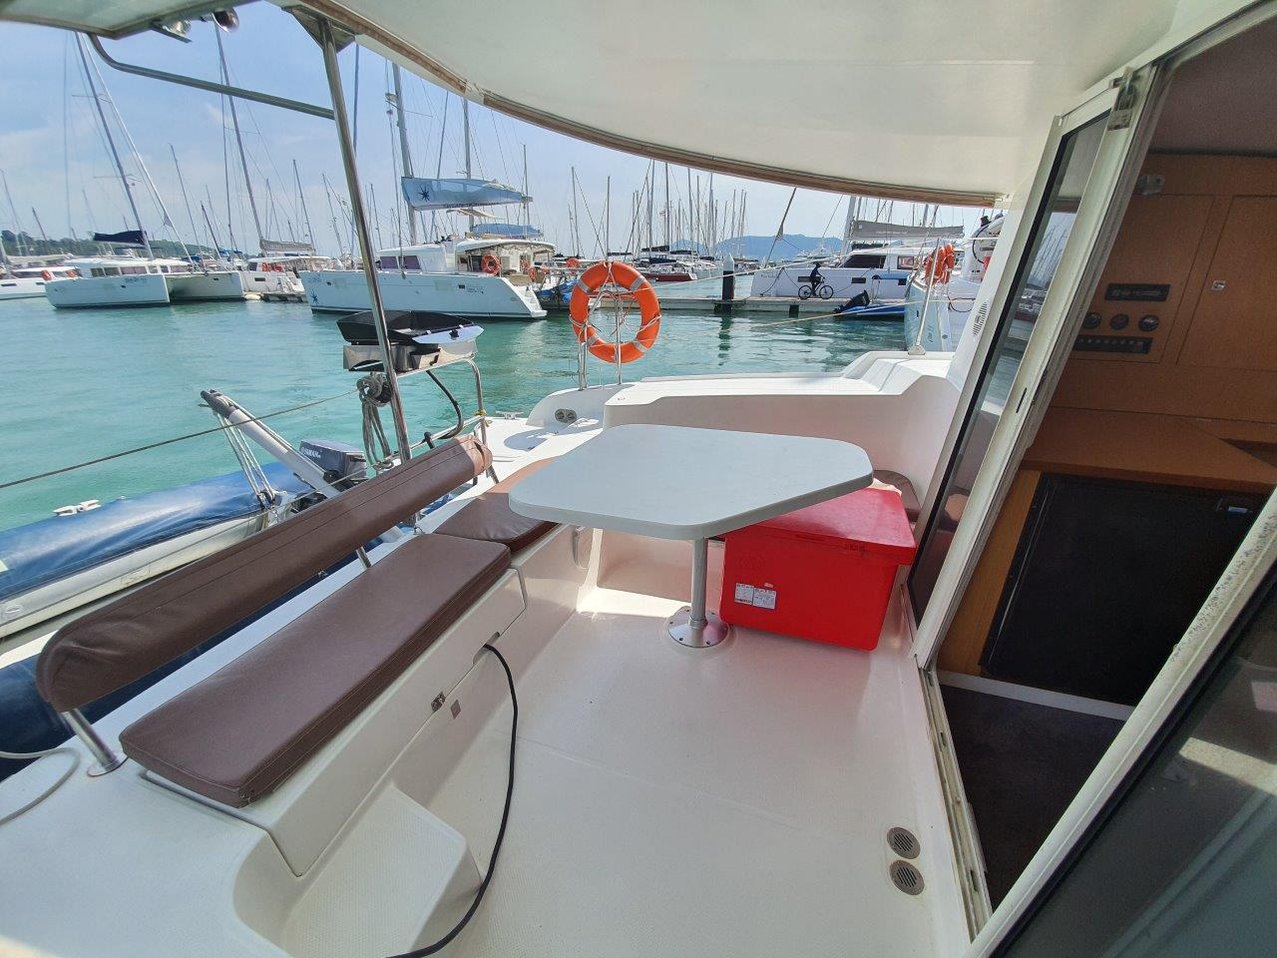 Mahe 36 - 3 cab. - Yacht Charter Queensland & Boat hire in Australia Queensland Whitsundays Coral Sea Marina 4